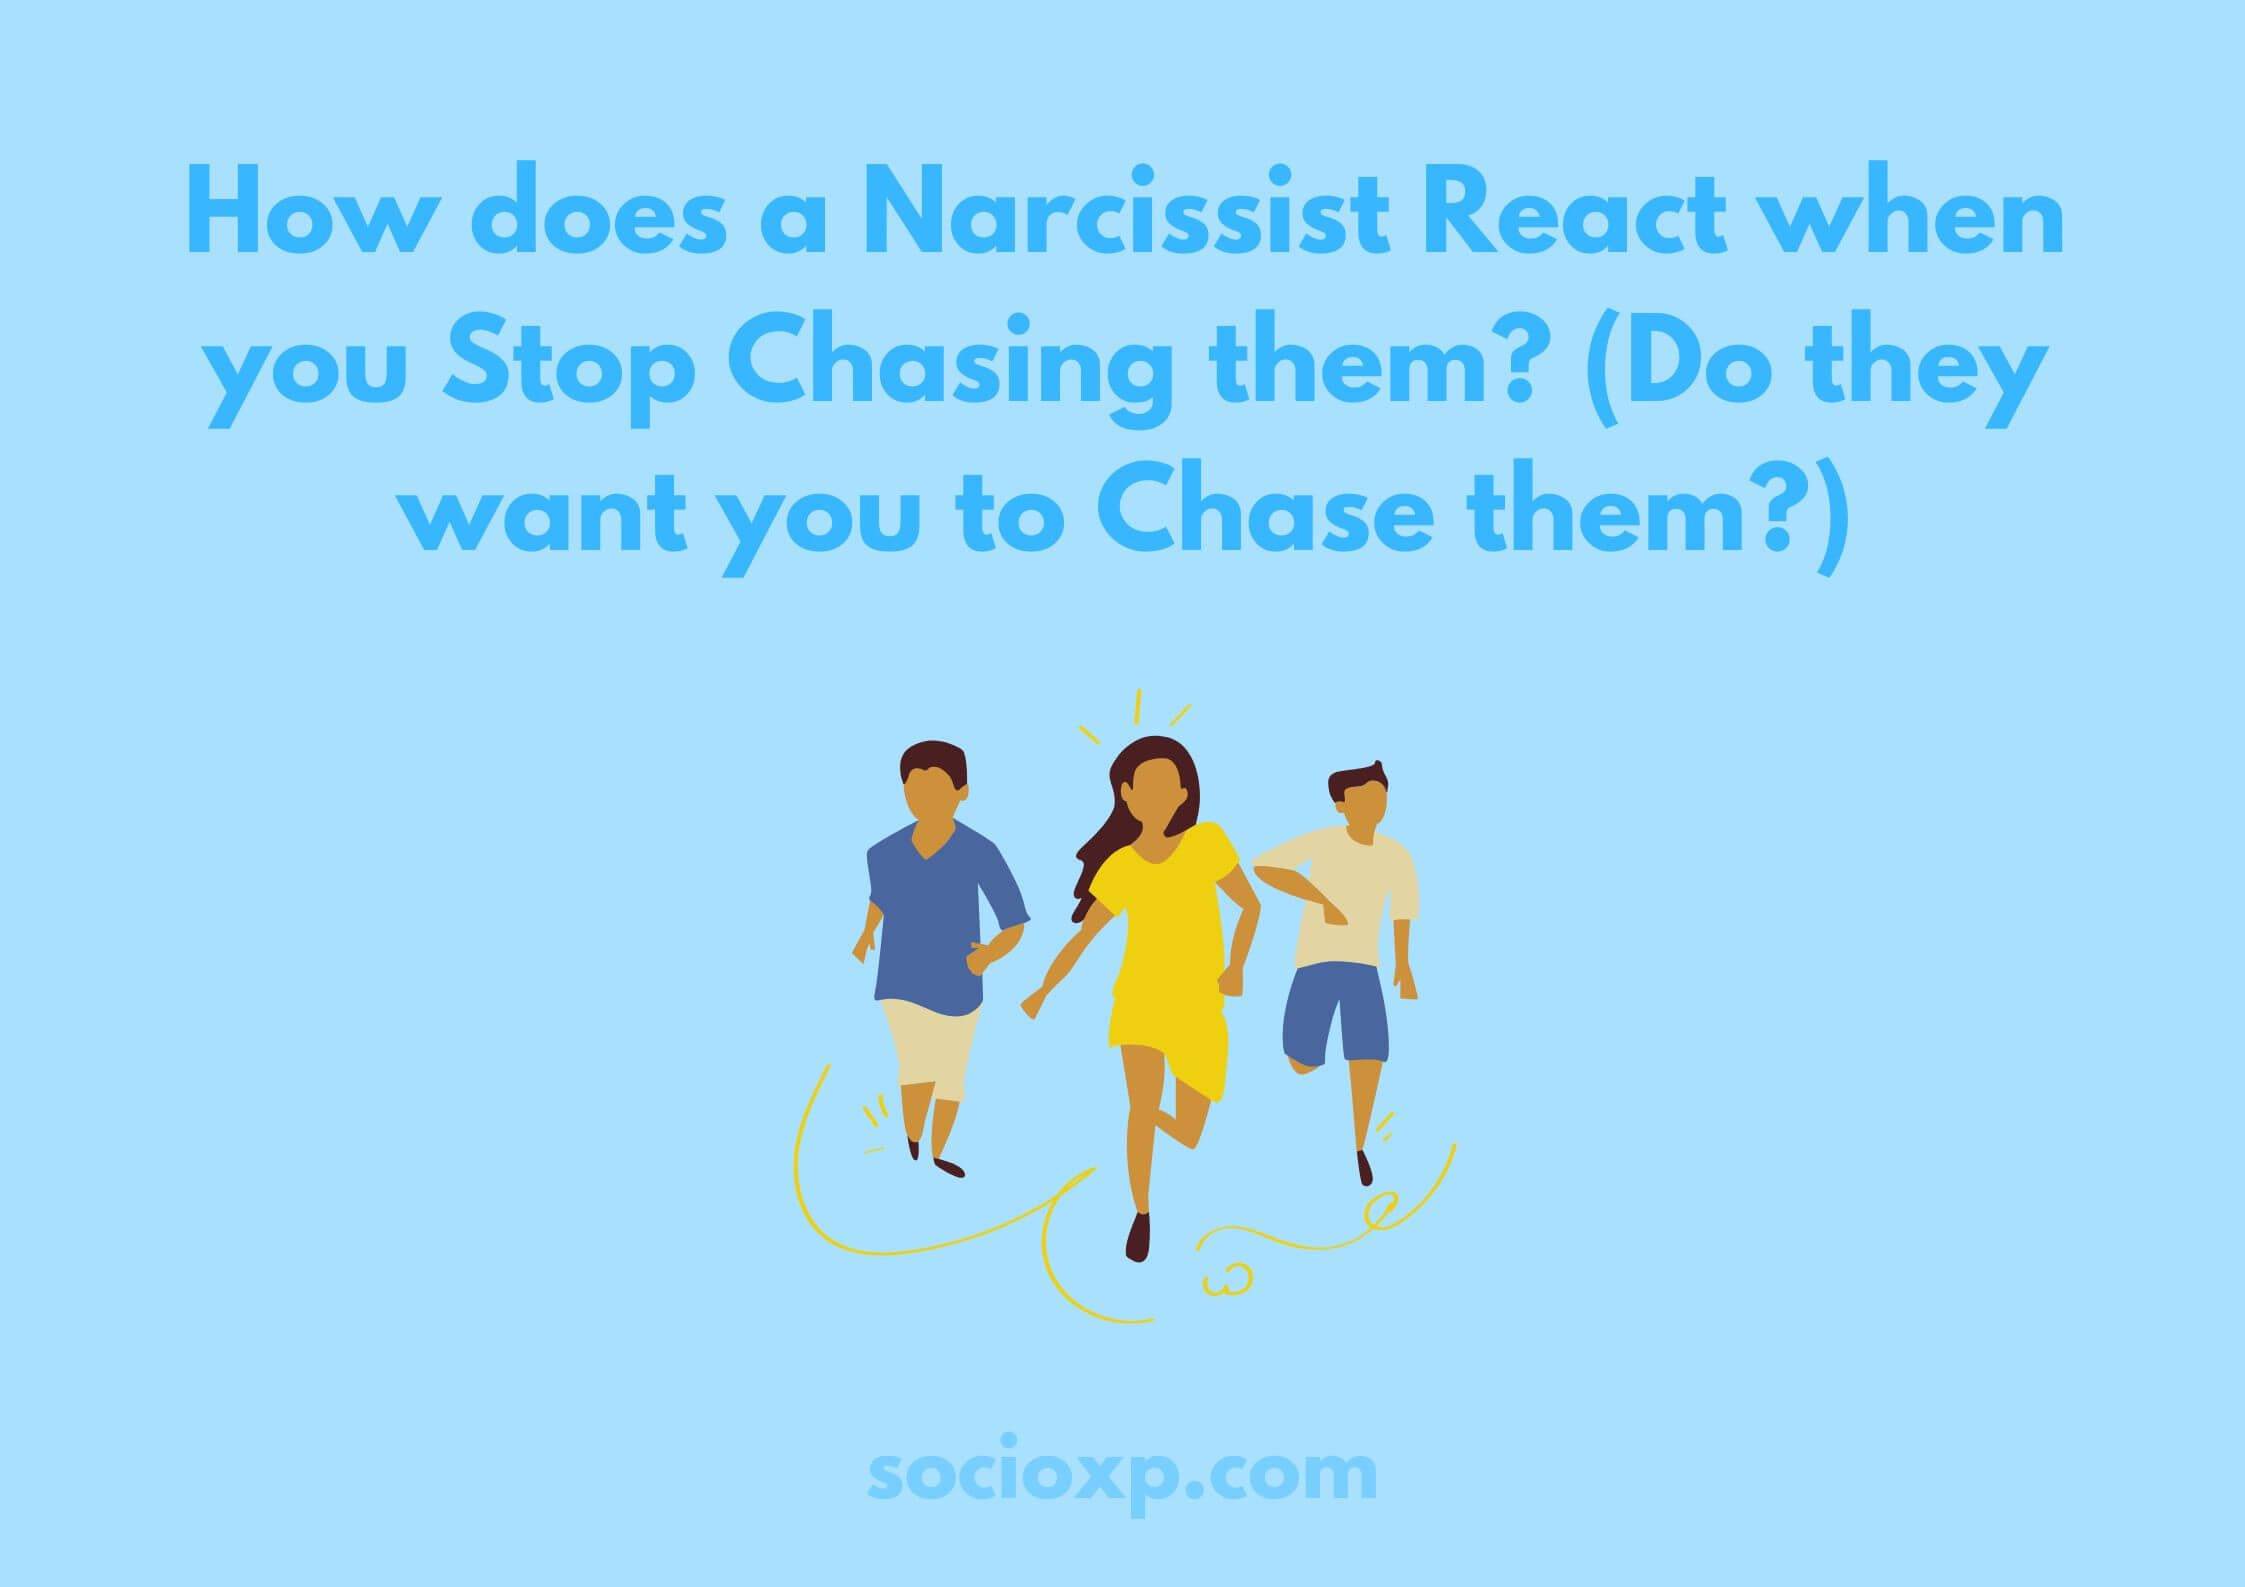 How does a Narcissist React when you Stop Chasing them? (Do they want you to Chase them?)